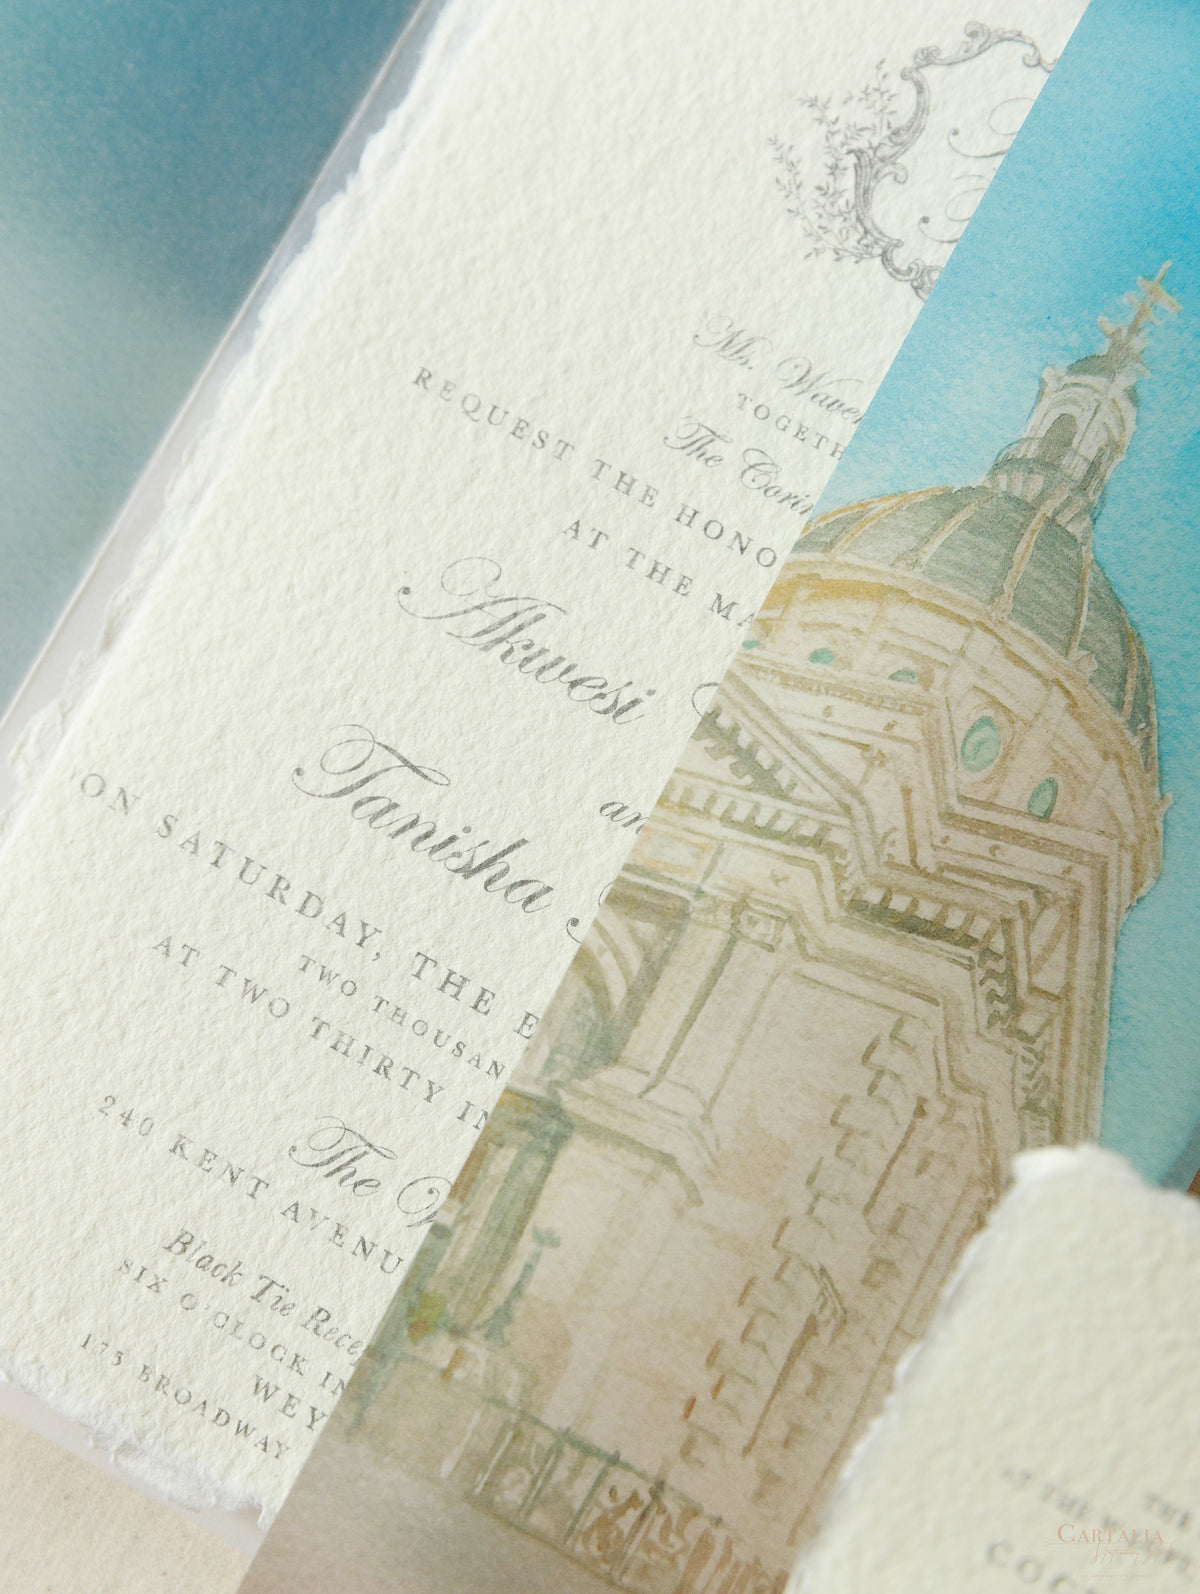 Venue : Weylin The Iconic Wedding Venue Invitations on  Hand Made Paper and Venue | Bespoke Commission A&T